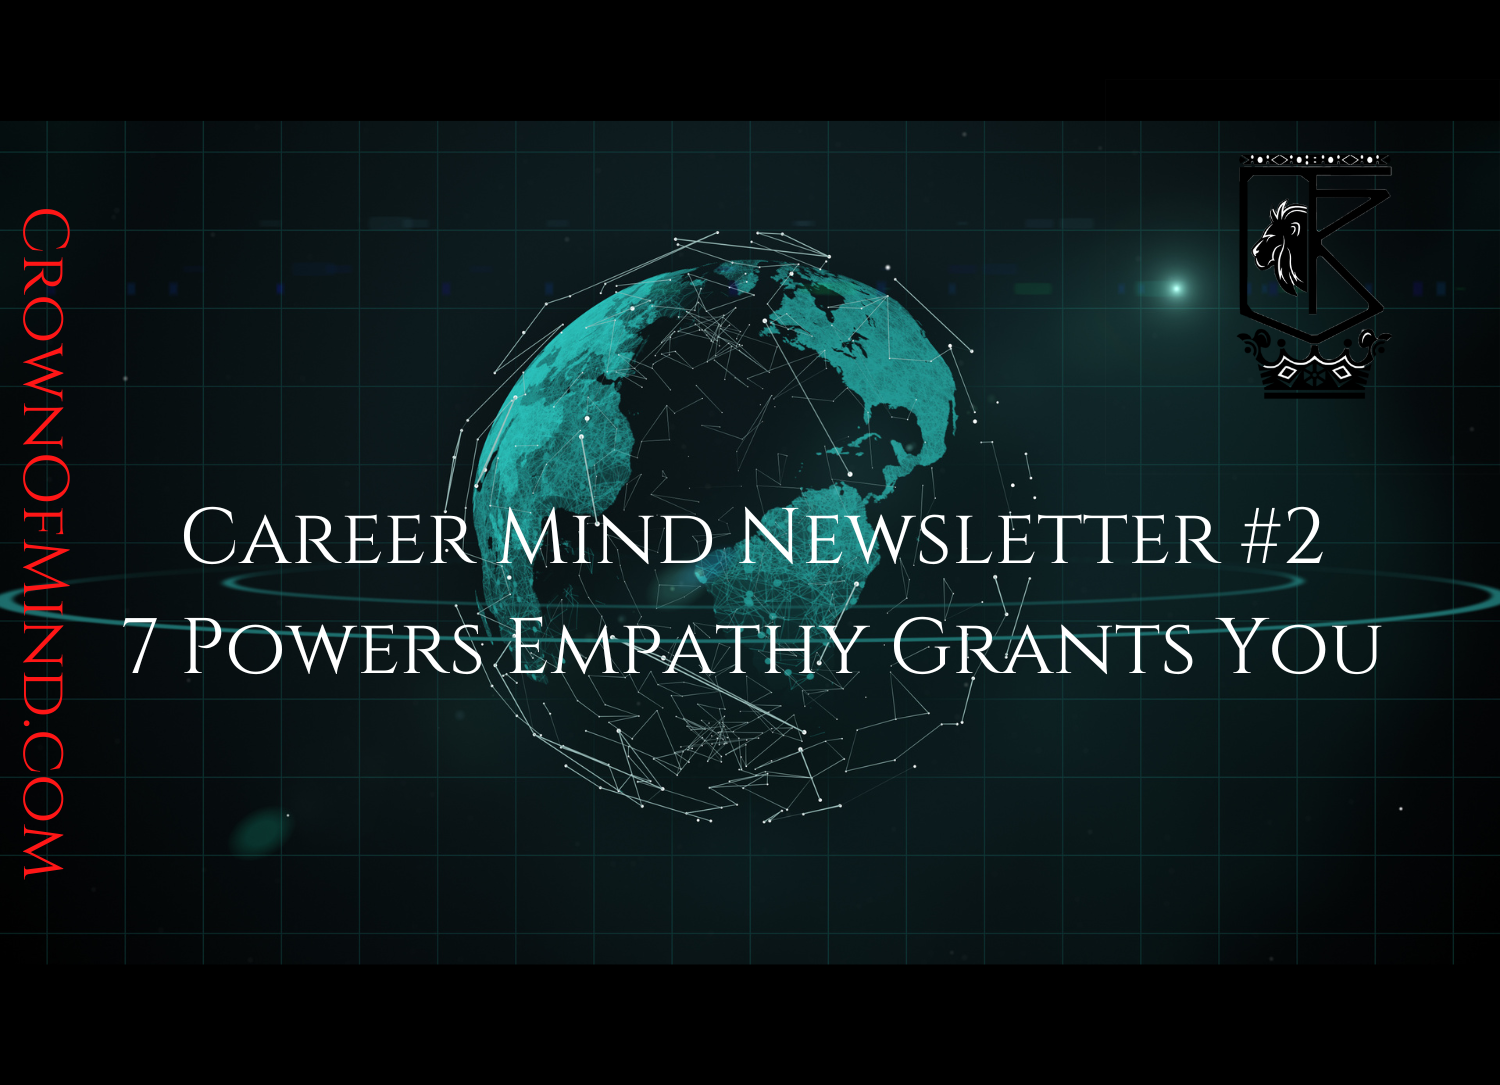 Career Mind Newsletter #2 – 7 Powers Empathy Grants You